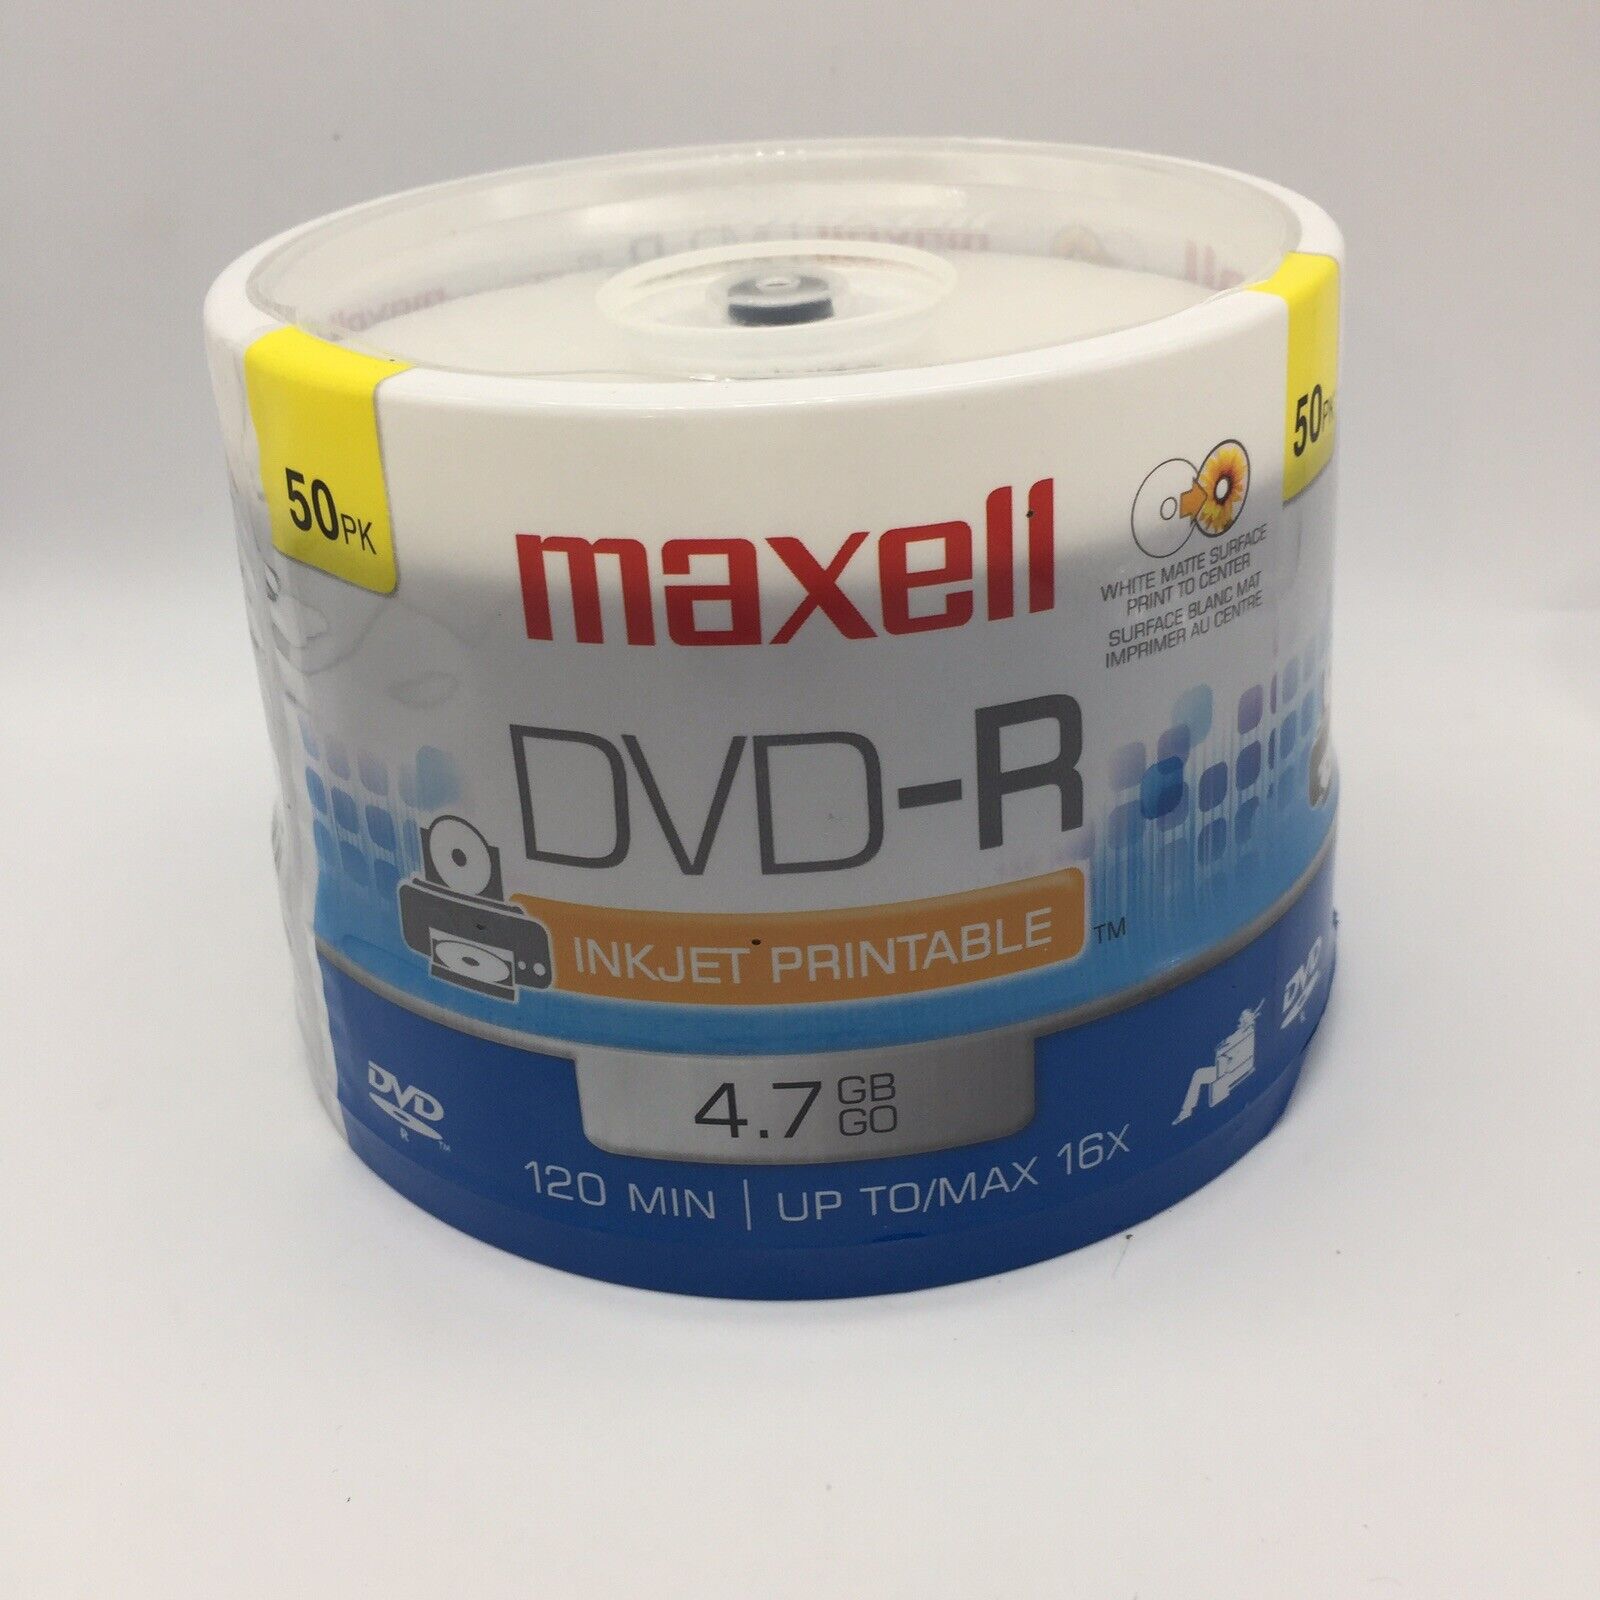 MAXELL DVD-R Blank Recordable Discs INKJET Printable 4.7GB 16x White 50 Pack New